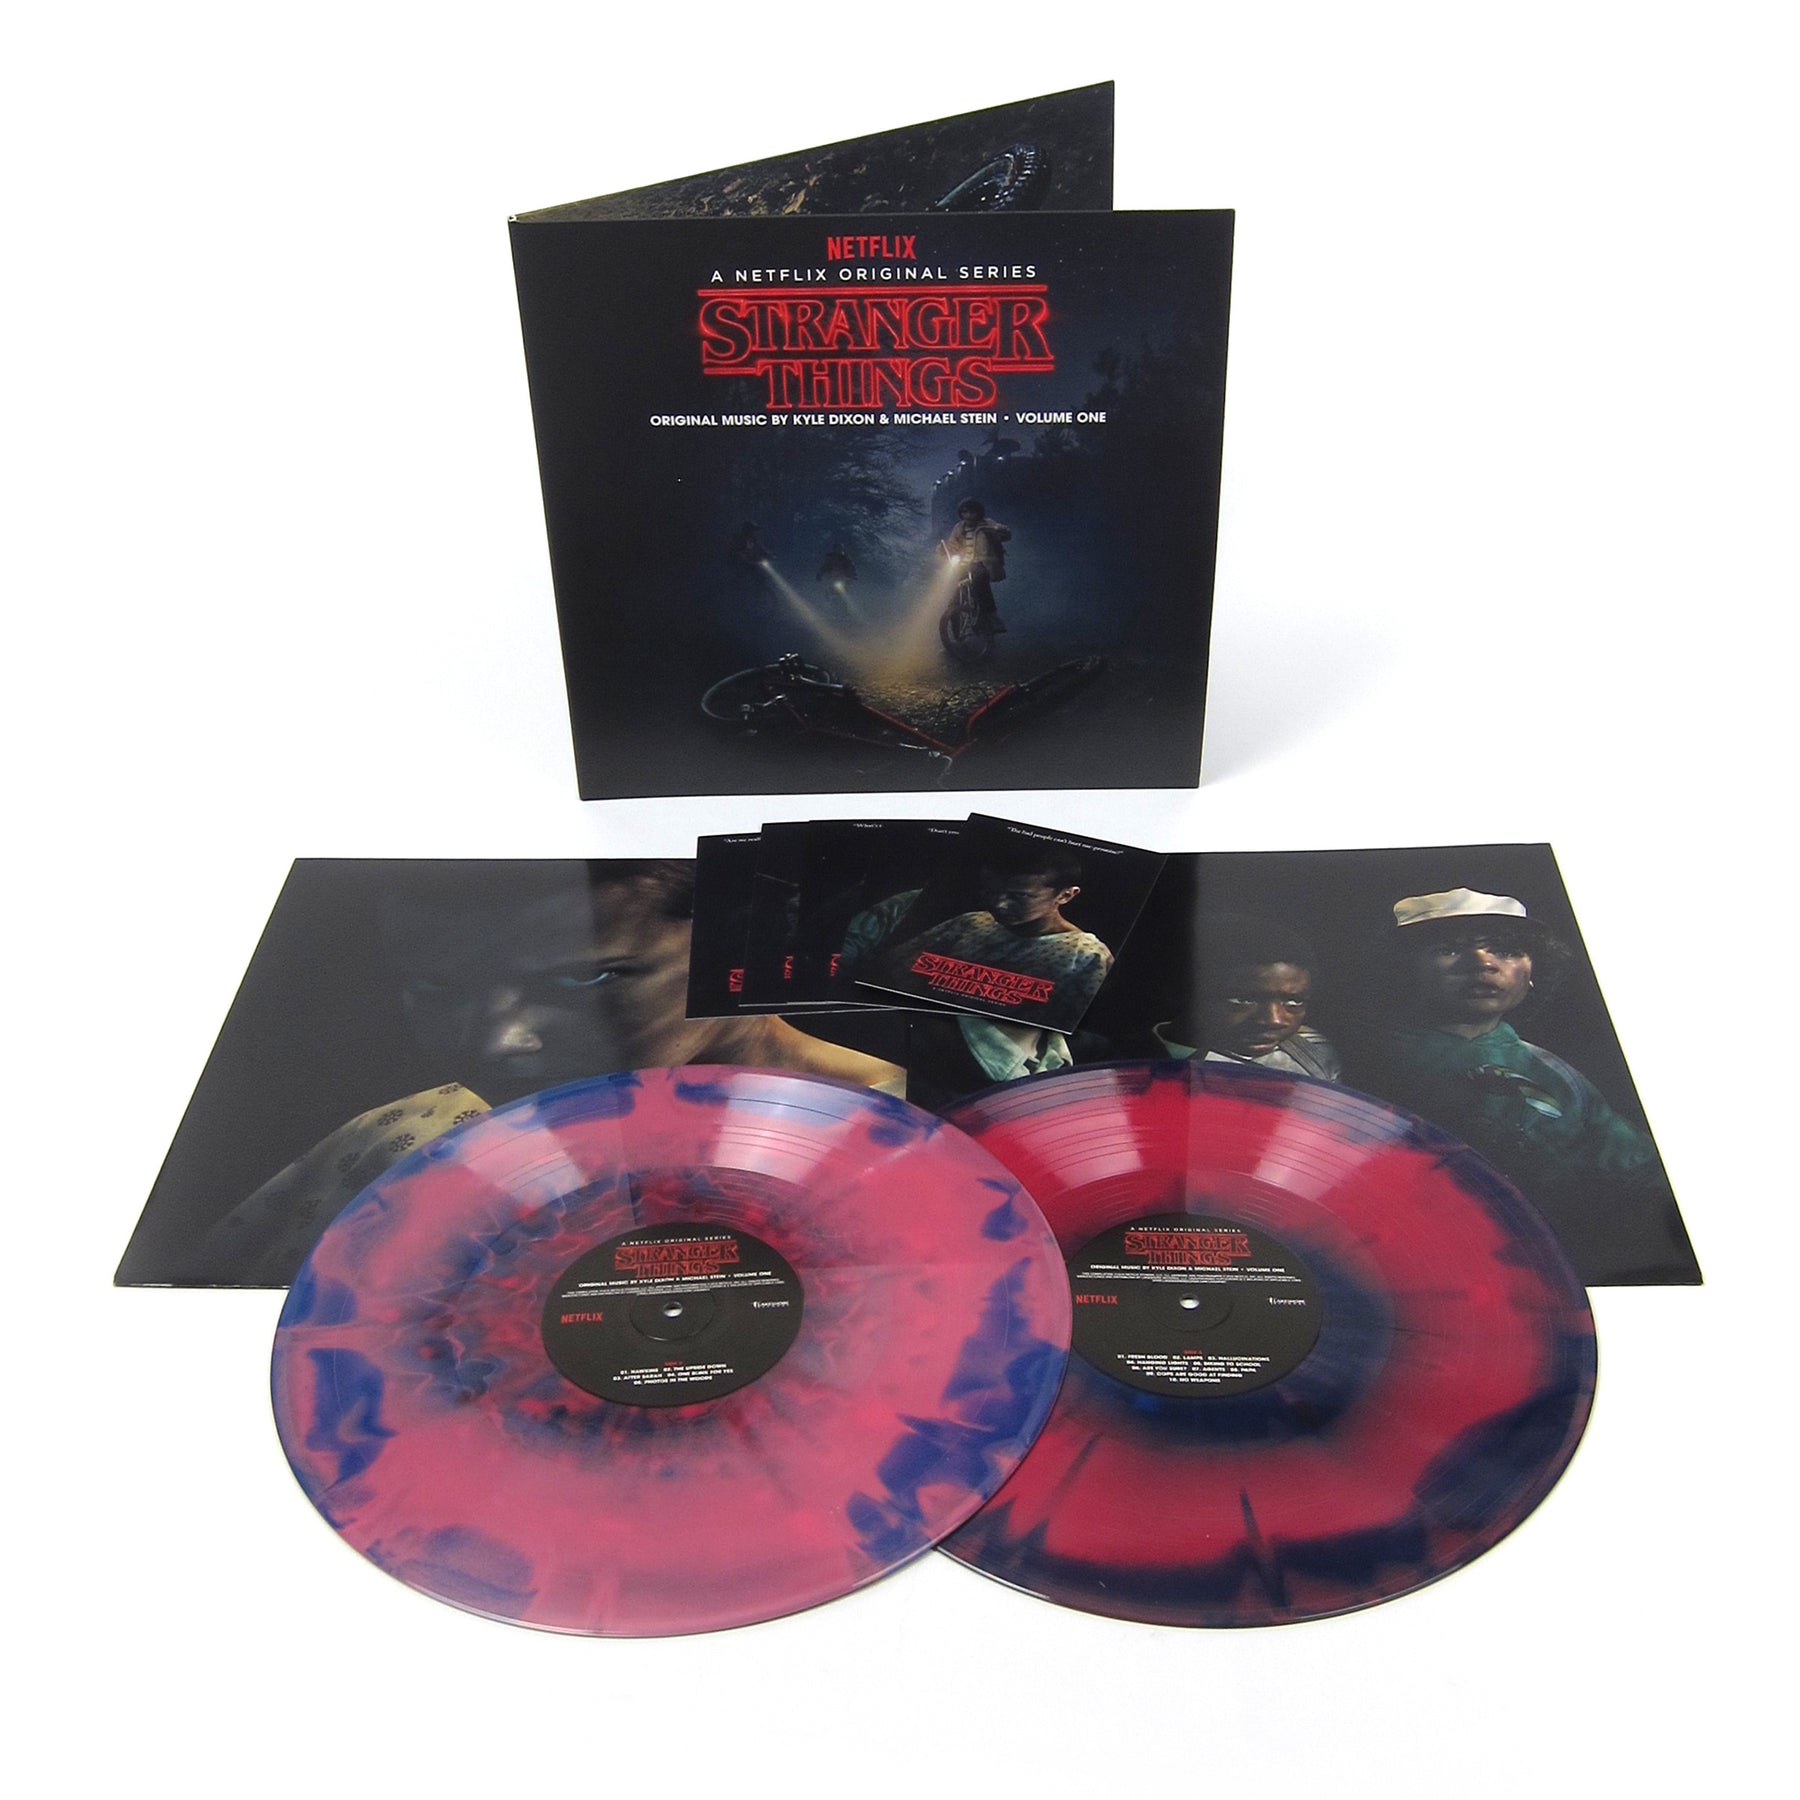 Kyle Dixon Michael Stein Stranger Things Vol 1 Deluxe Edition